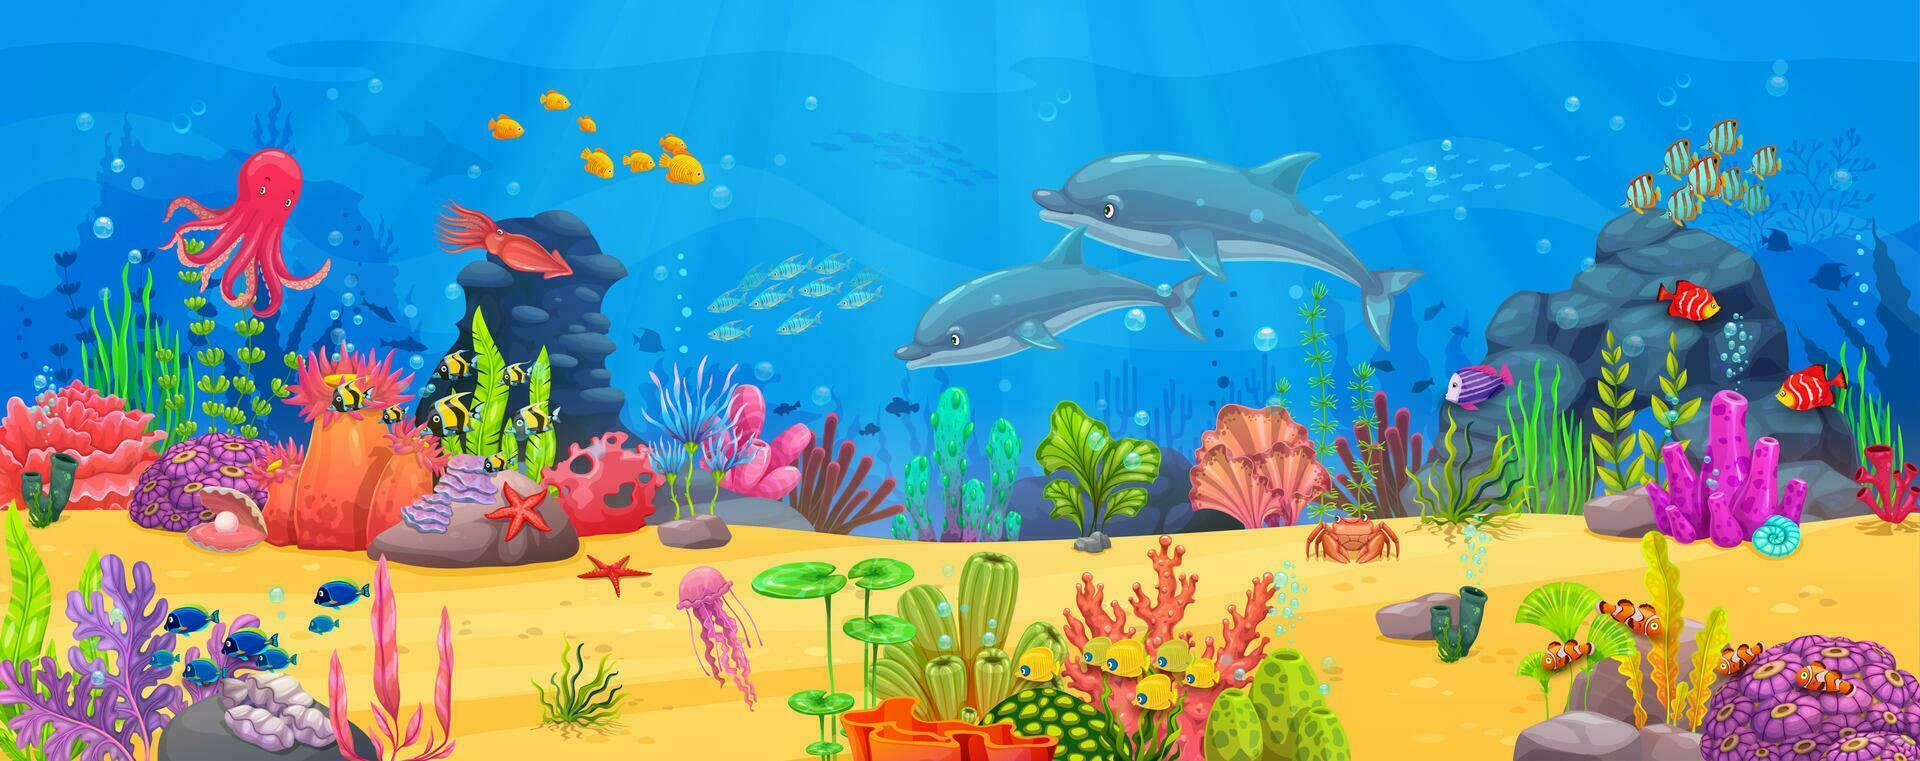 Banner or game level with sea underwater animals vector